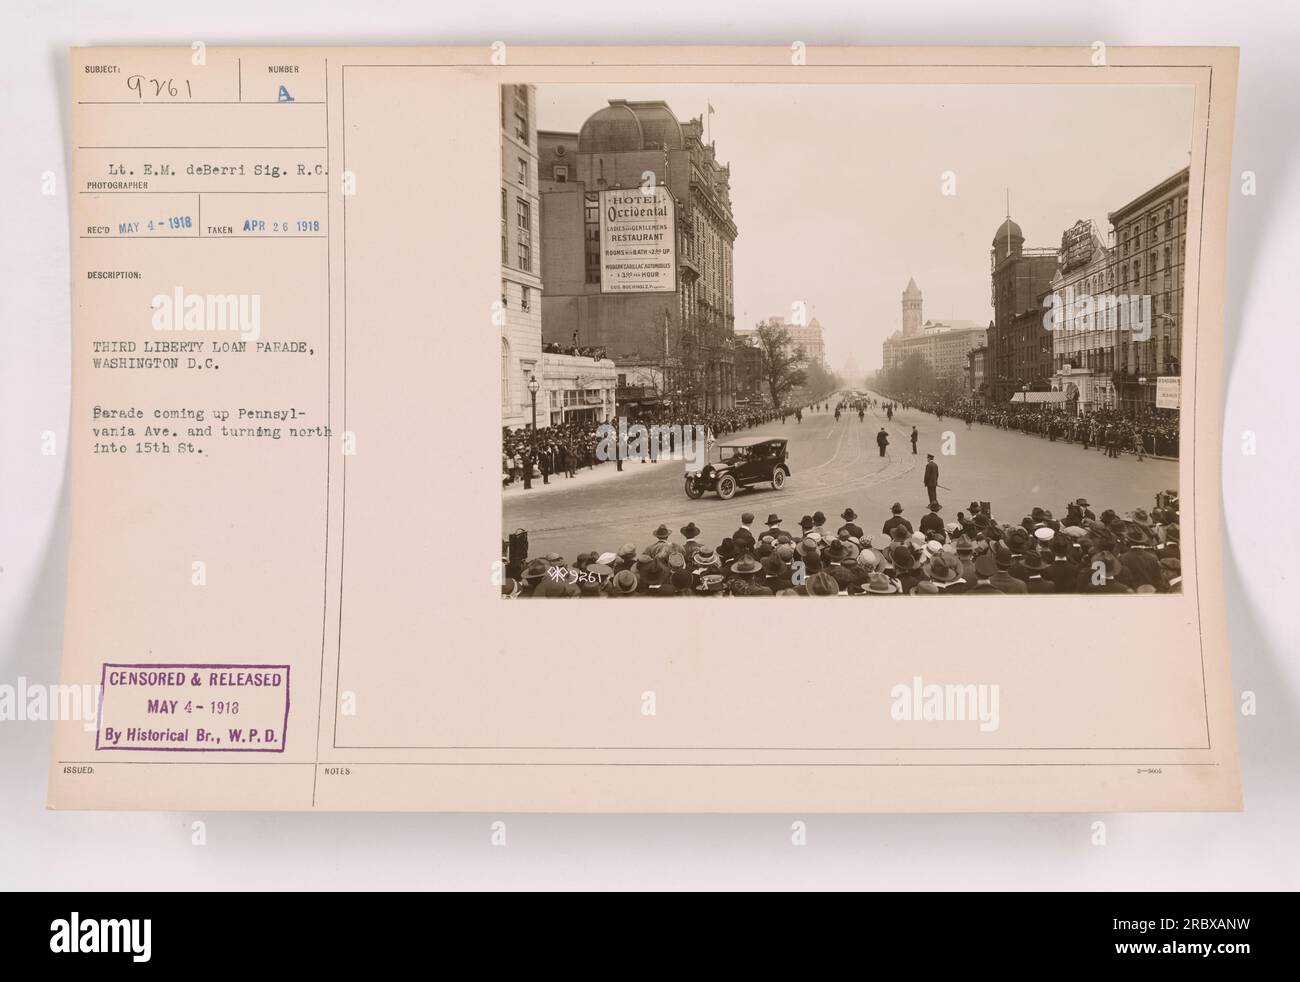 Image depicts the Assued Third Liberty Loan Parade in Washington D.C. on April 26, 1918. Lt. E.M. deBerri and Sig. R.C. of the American military are present. The parade is seen moving up Pennsylvania Ave. and turning north into 15th St. Photograph authorized and released on May 4, 1918, by the Historical Br., W.P.D. Stock Photo